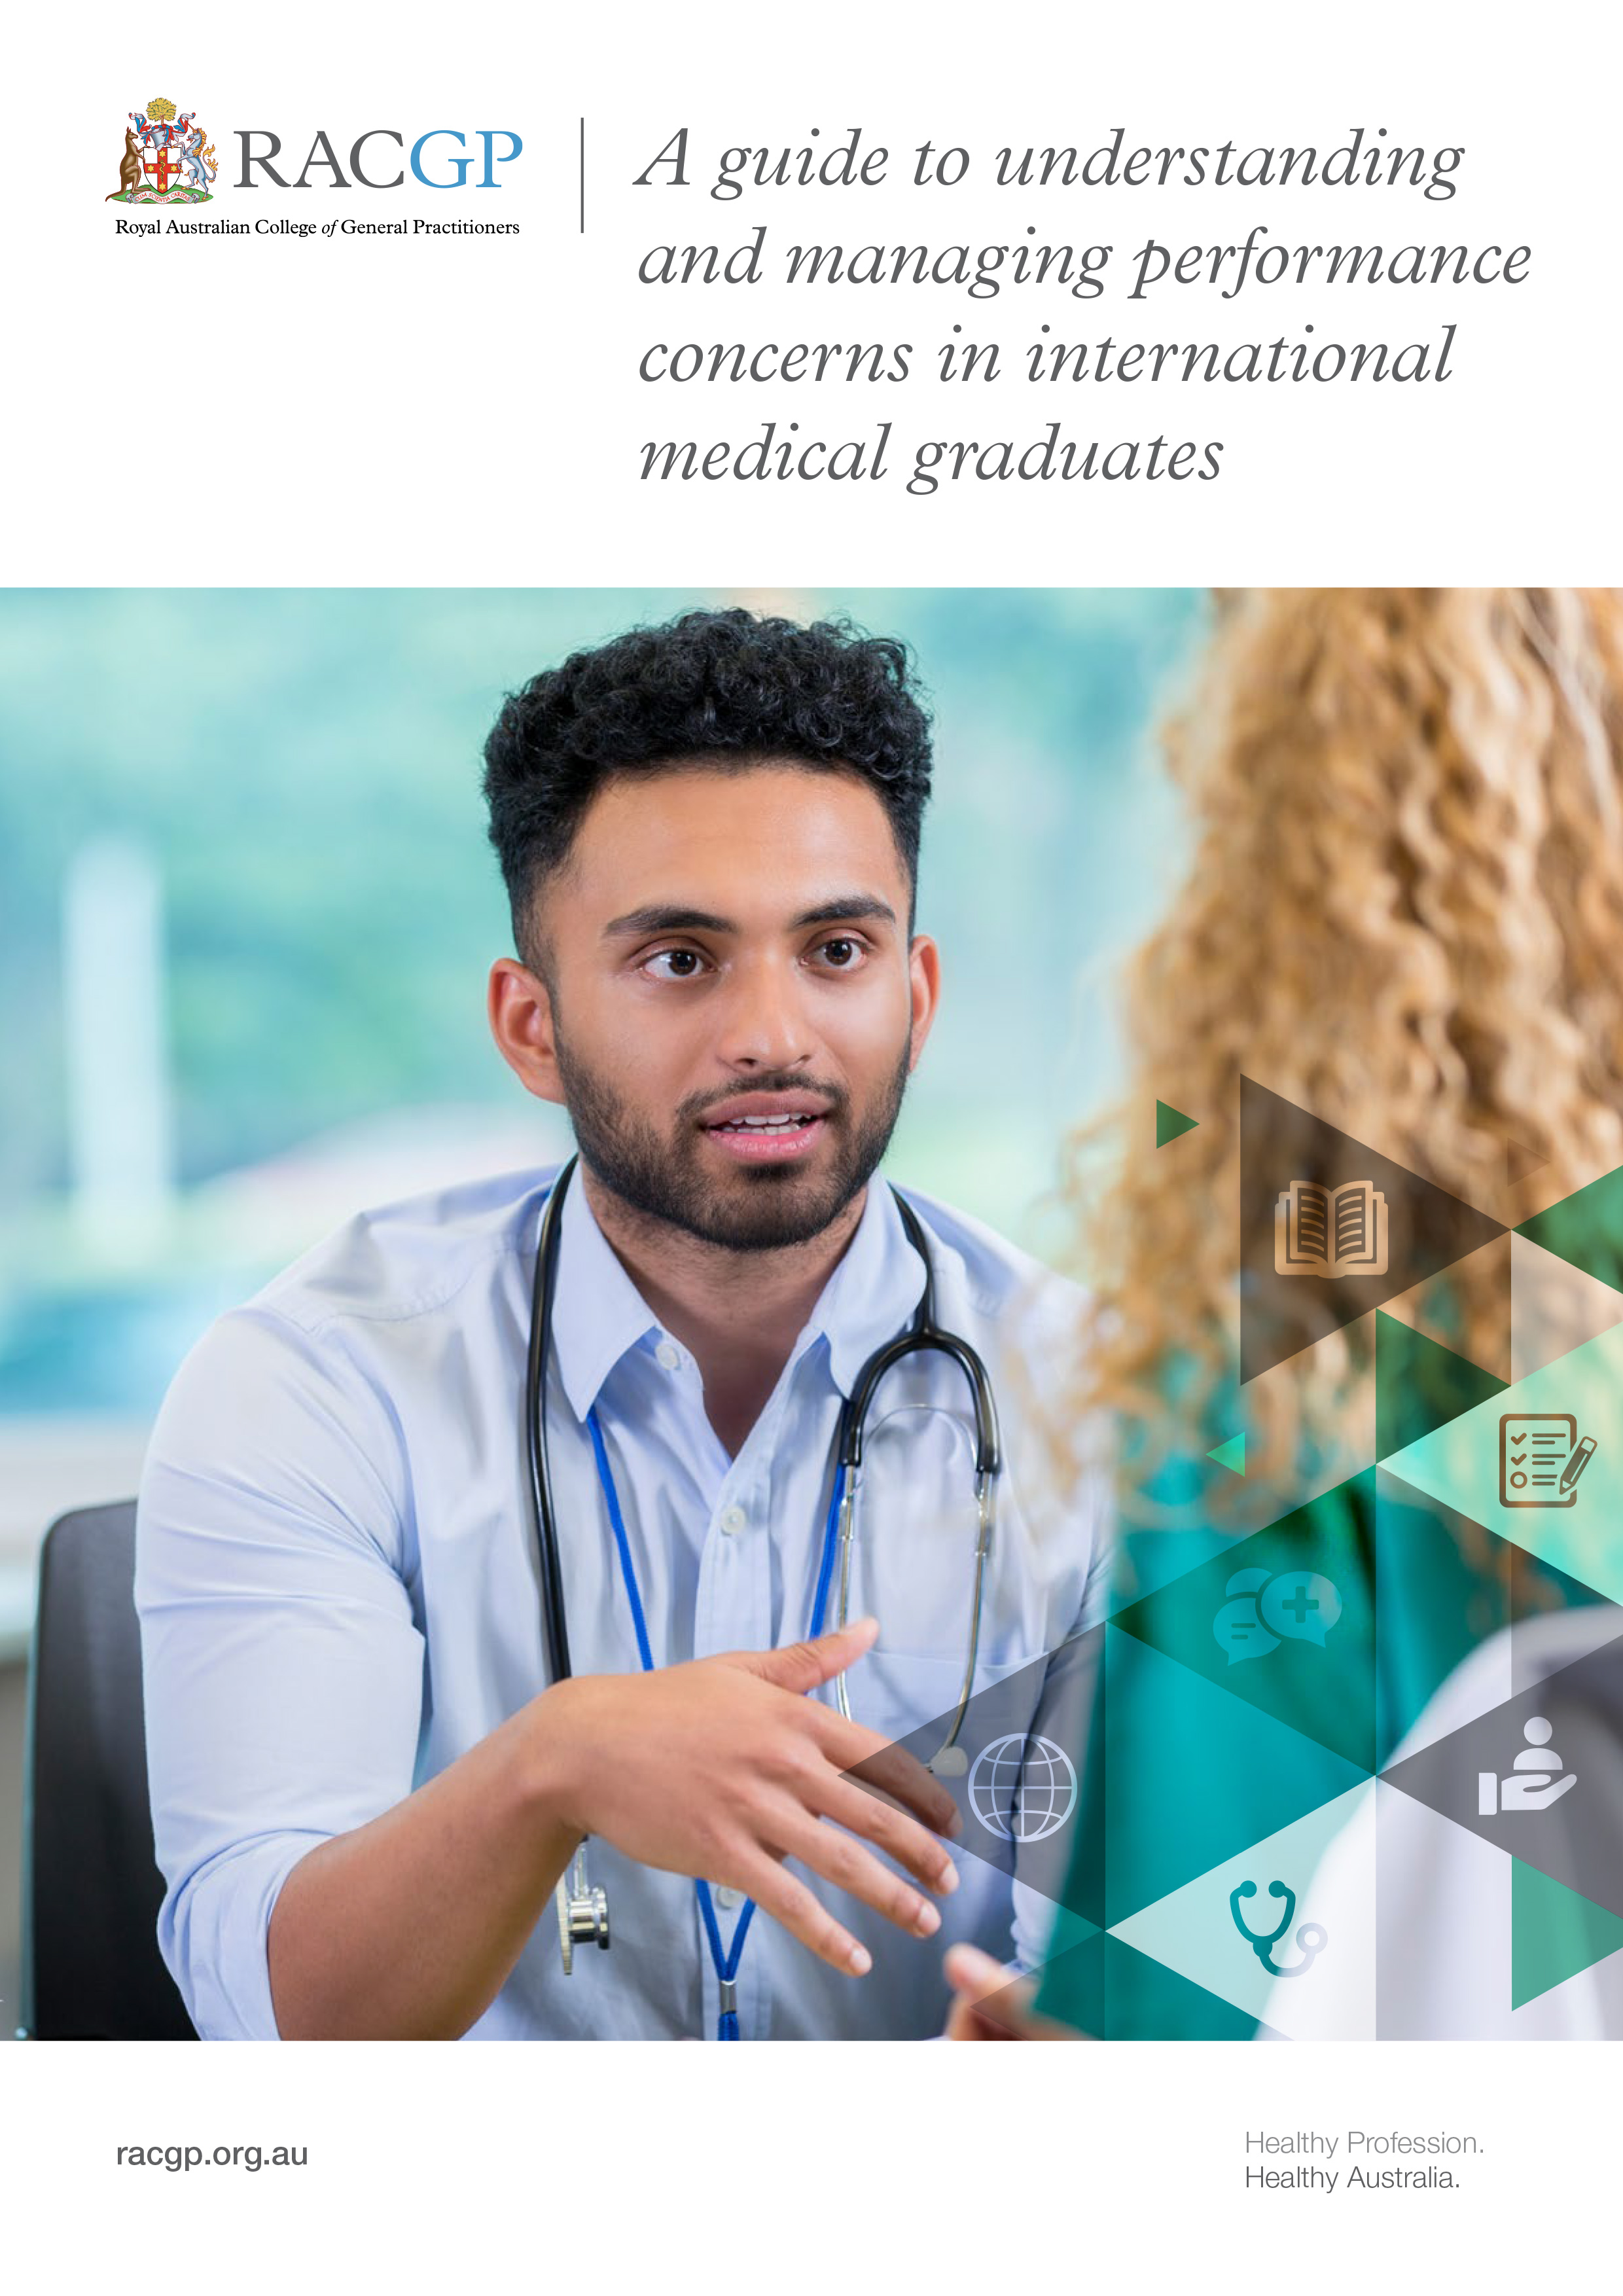 A guide to understanding and managing performance concerns in international medical graduates